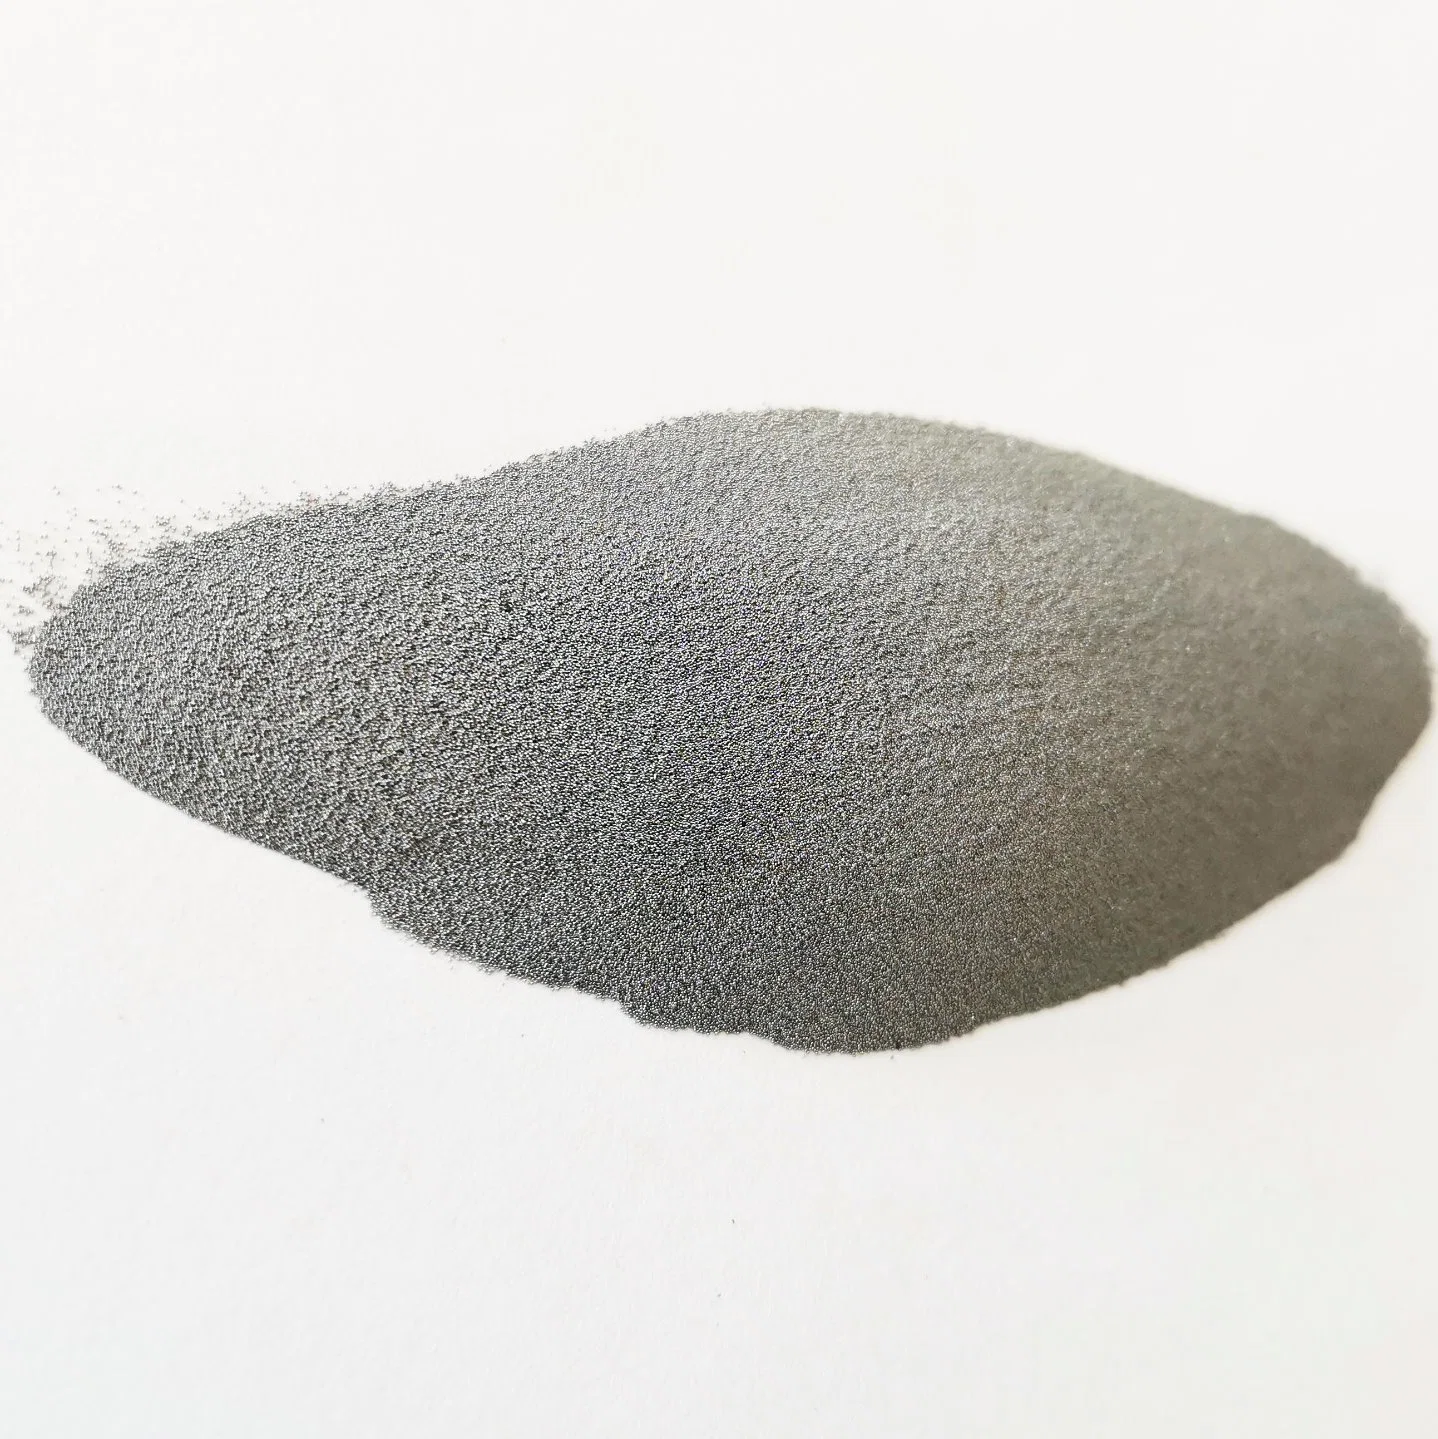 Stainless Steel H13 Metal Powder for 3D Printing